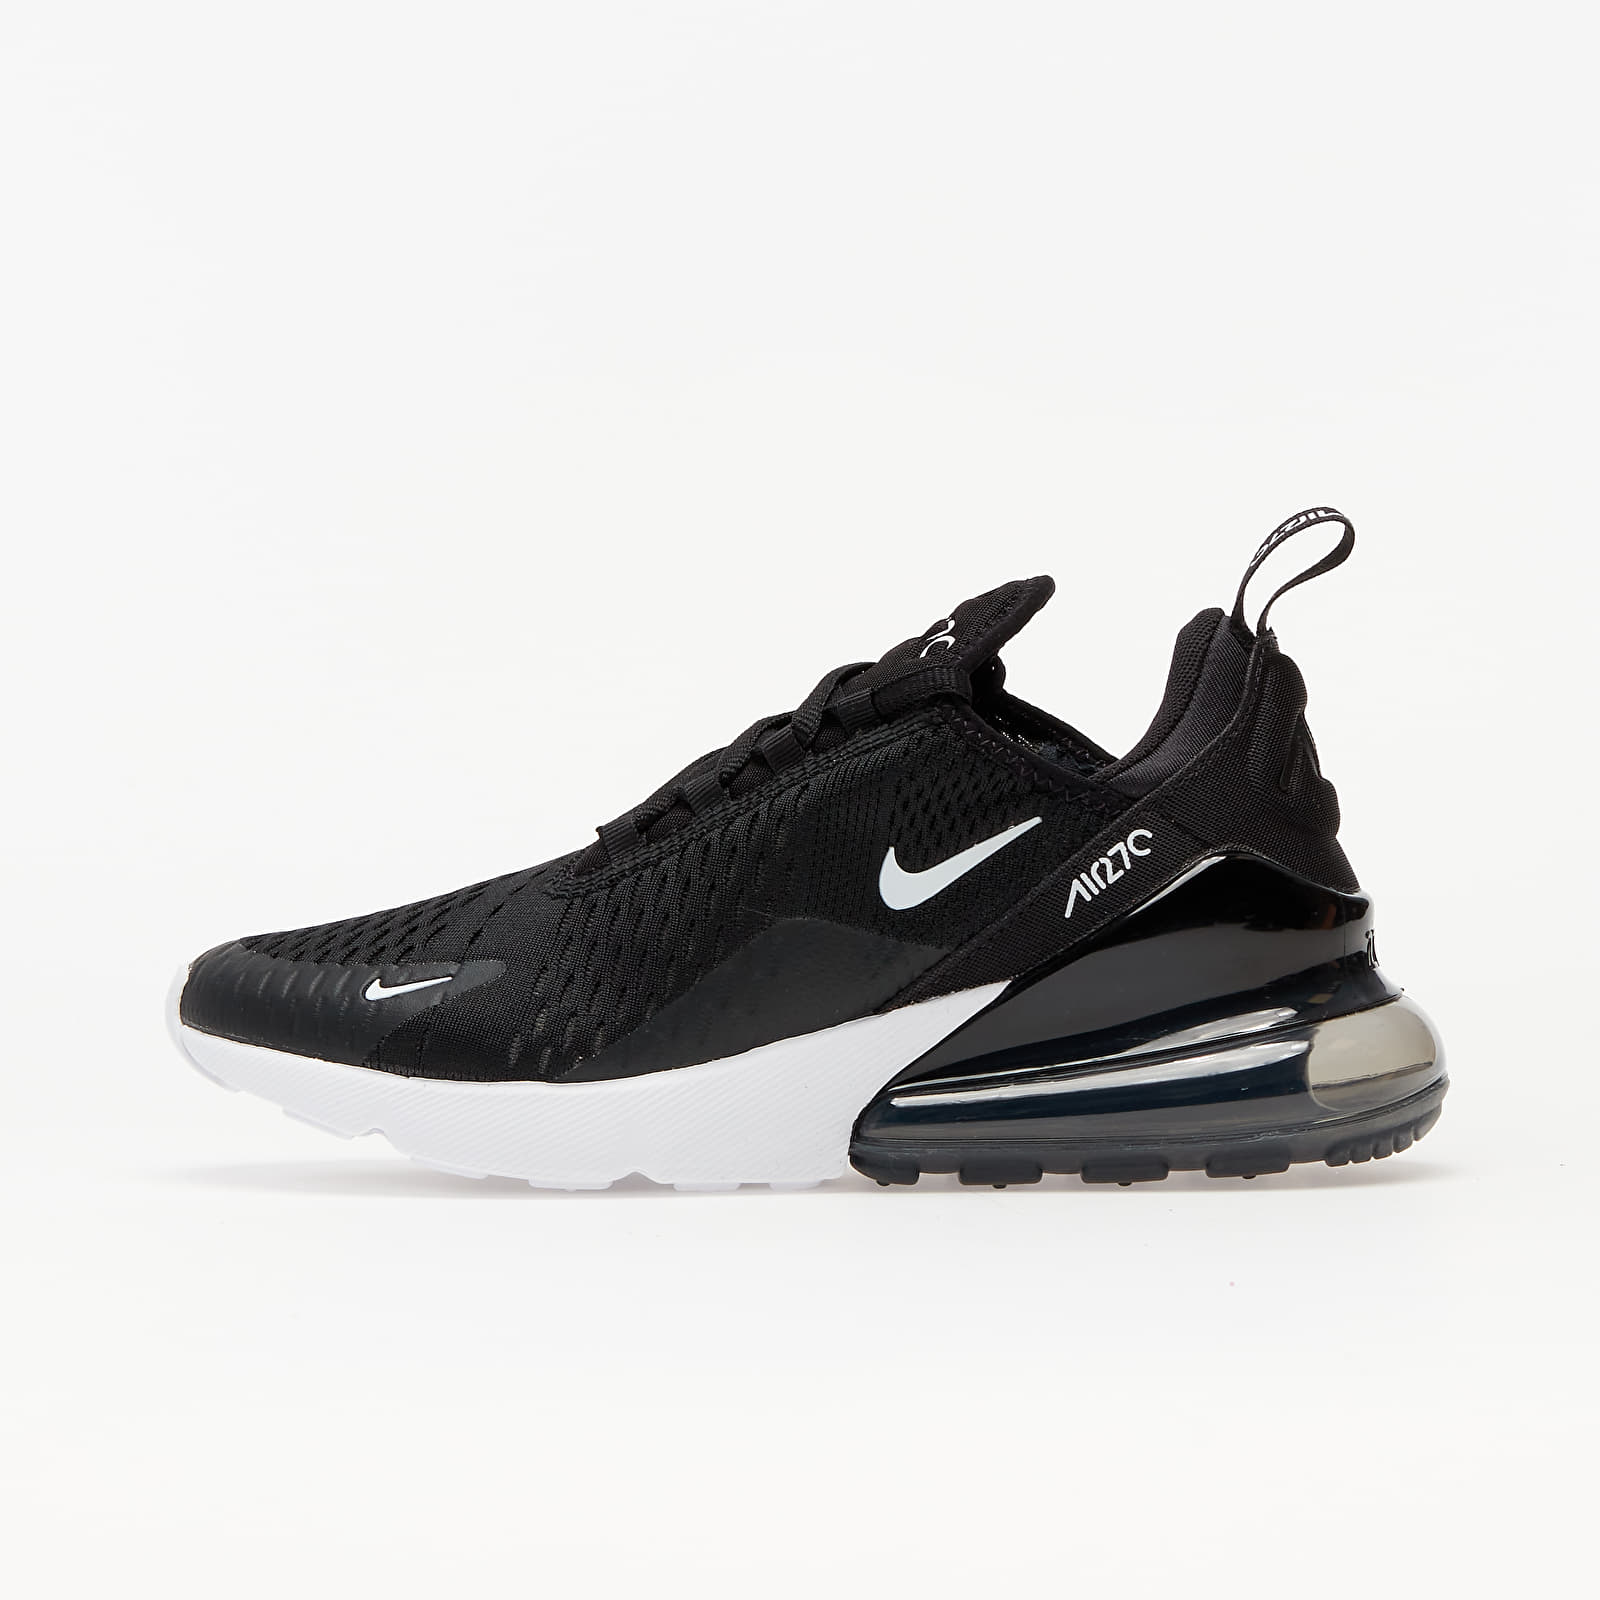 Chaussures et baskets femme Nike W Air Max 270 Black/ Anthracite-White